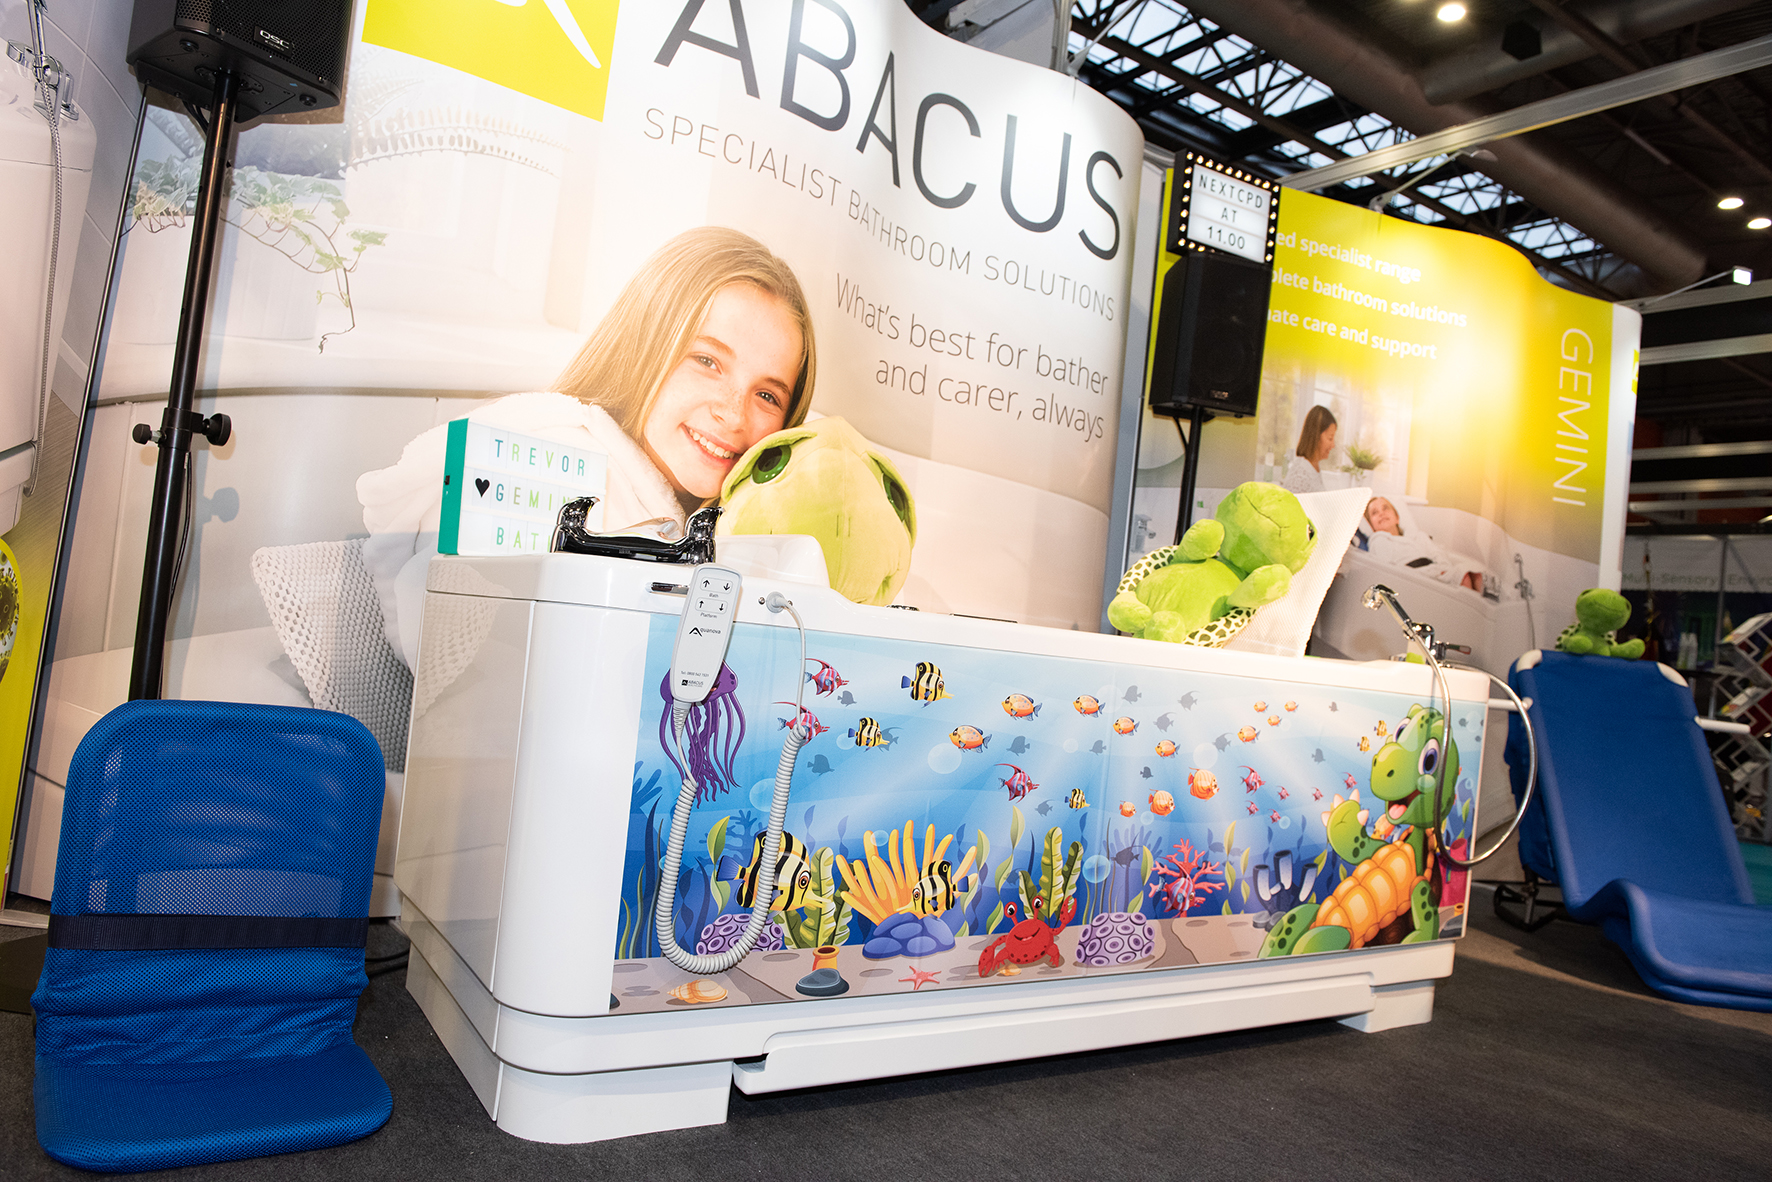 Abacus to present new Gemini 2000 bath, antimicrobial technology and CPD seminar at Kidz Middle